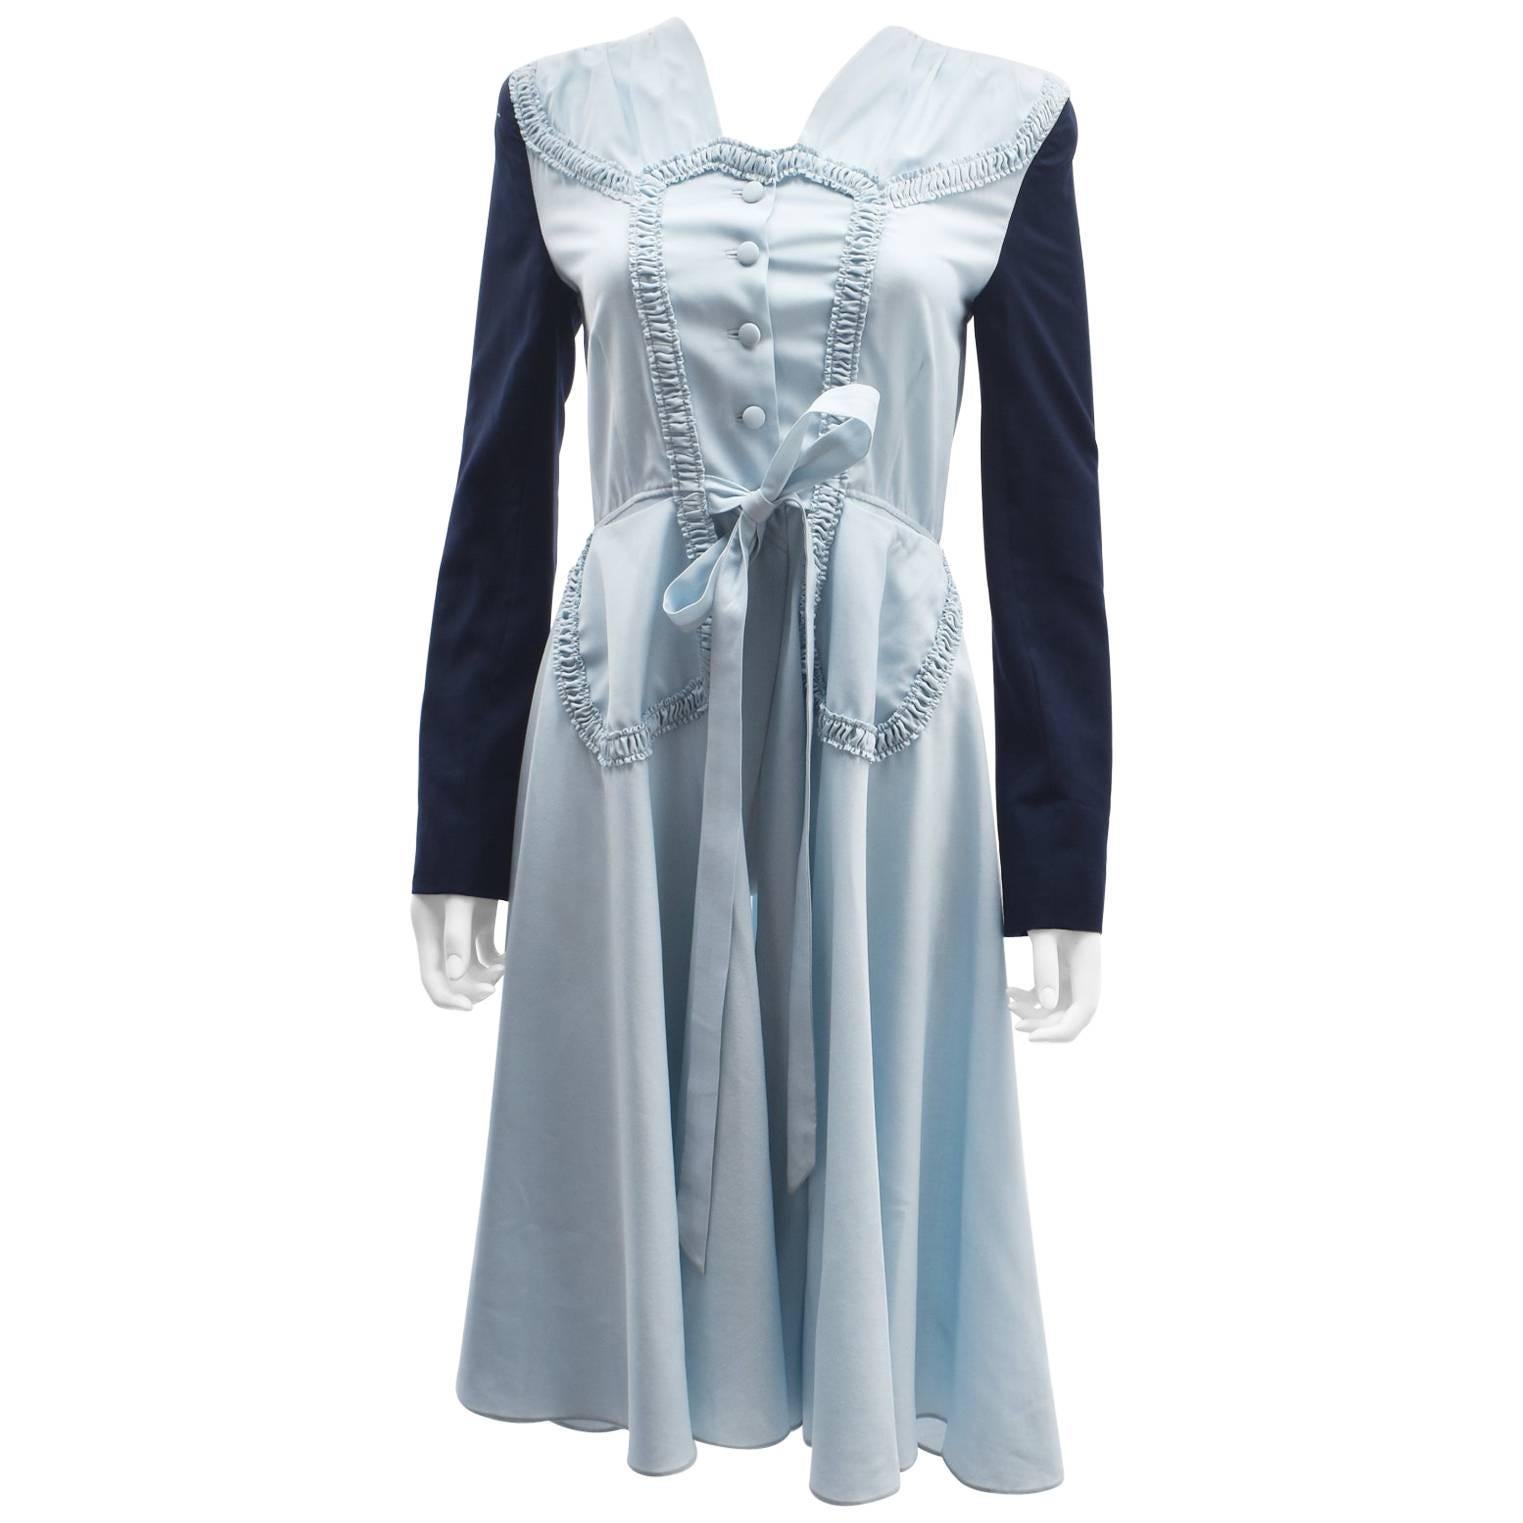 Margiela Light Blue Tailored Ruffle Dress with Contrast Navy Sleeves For Sale